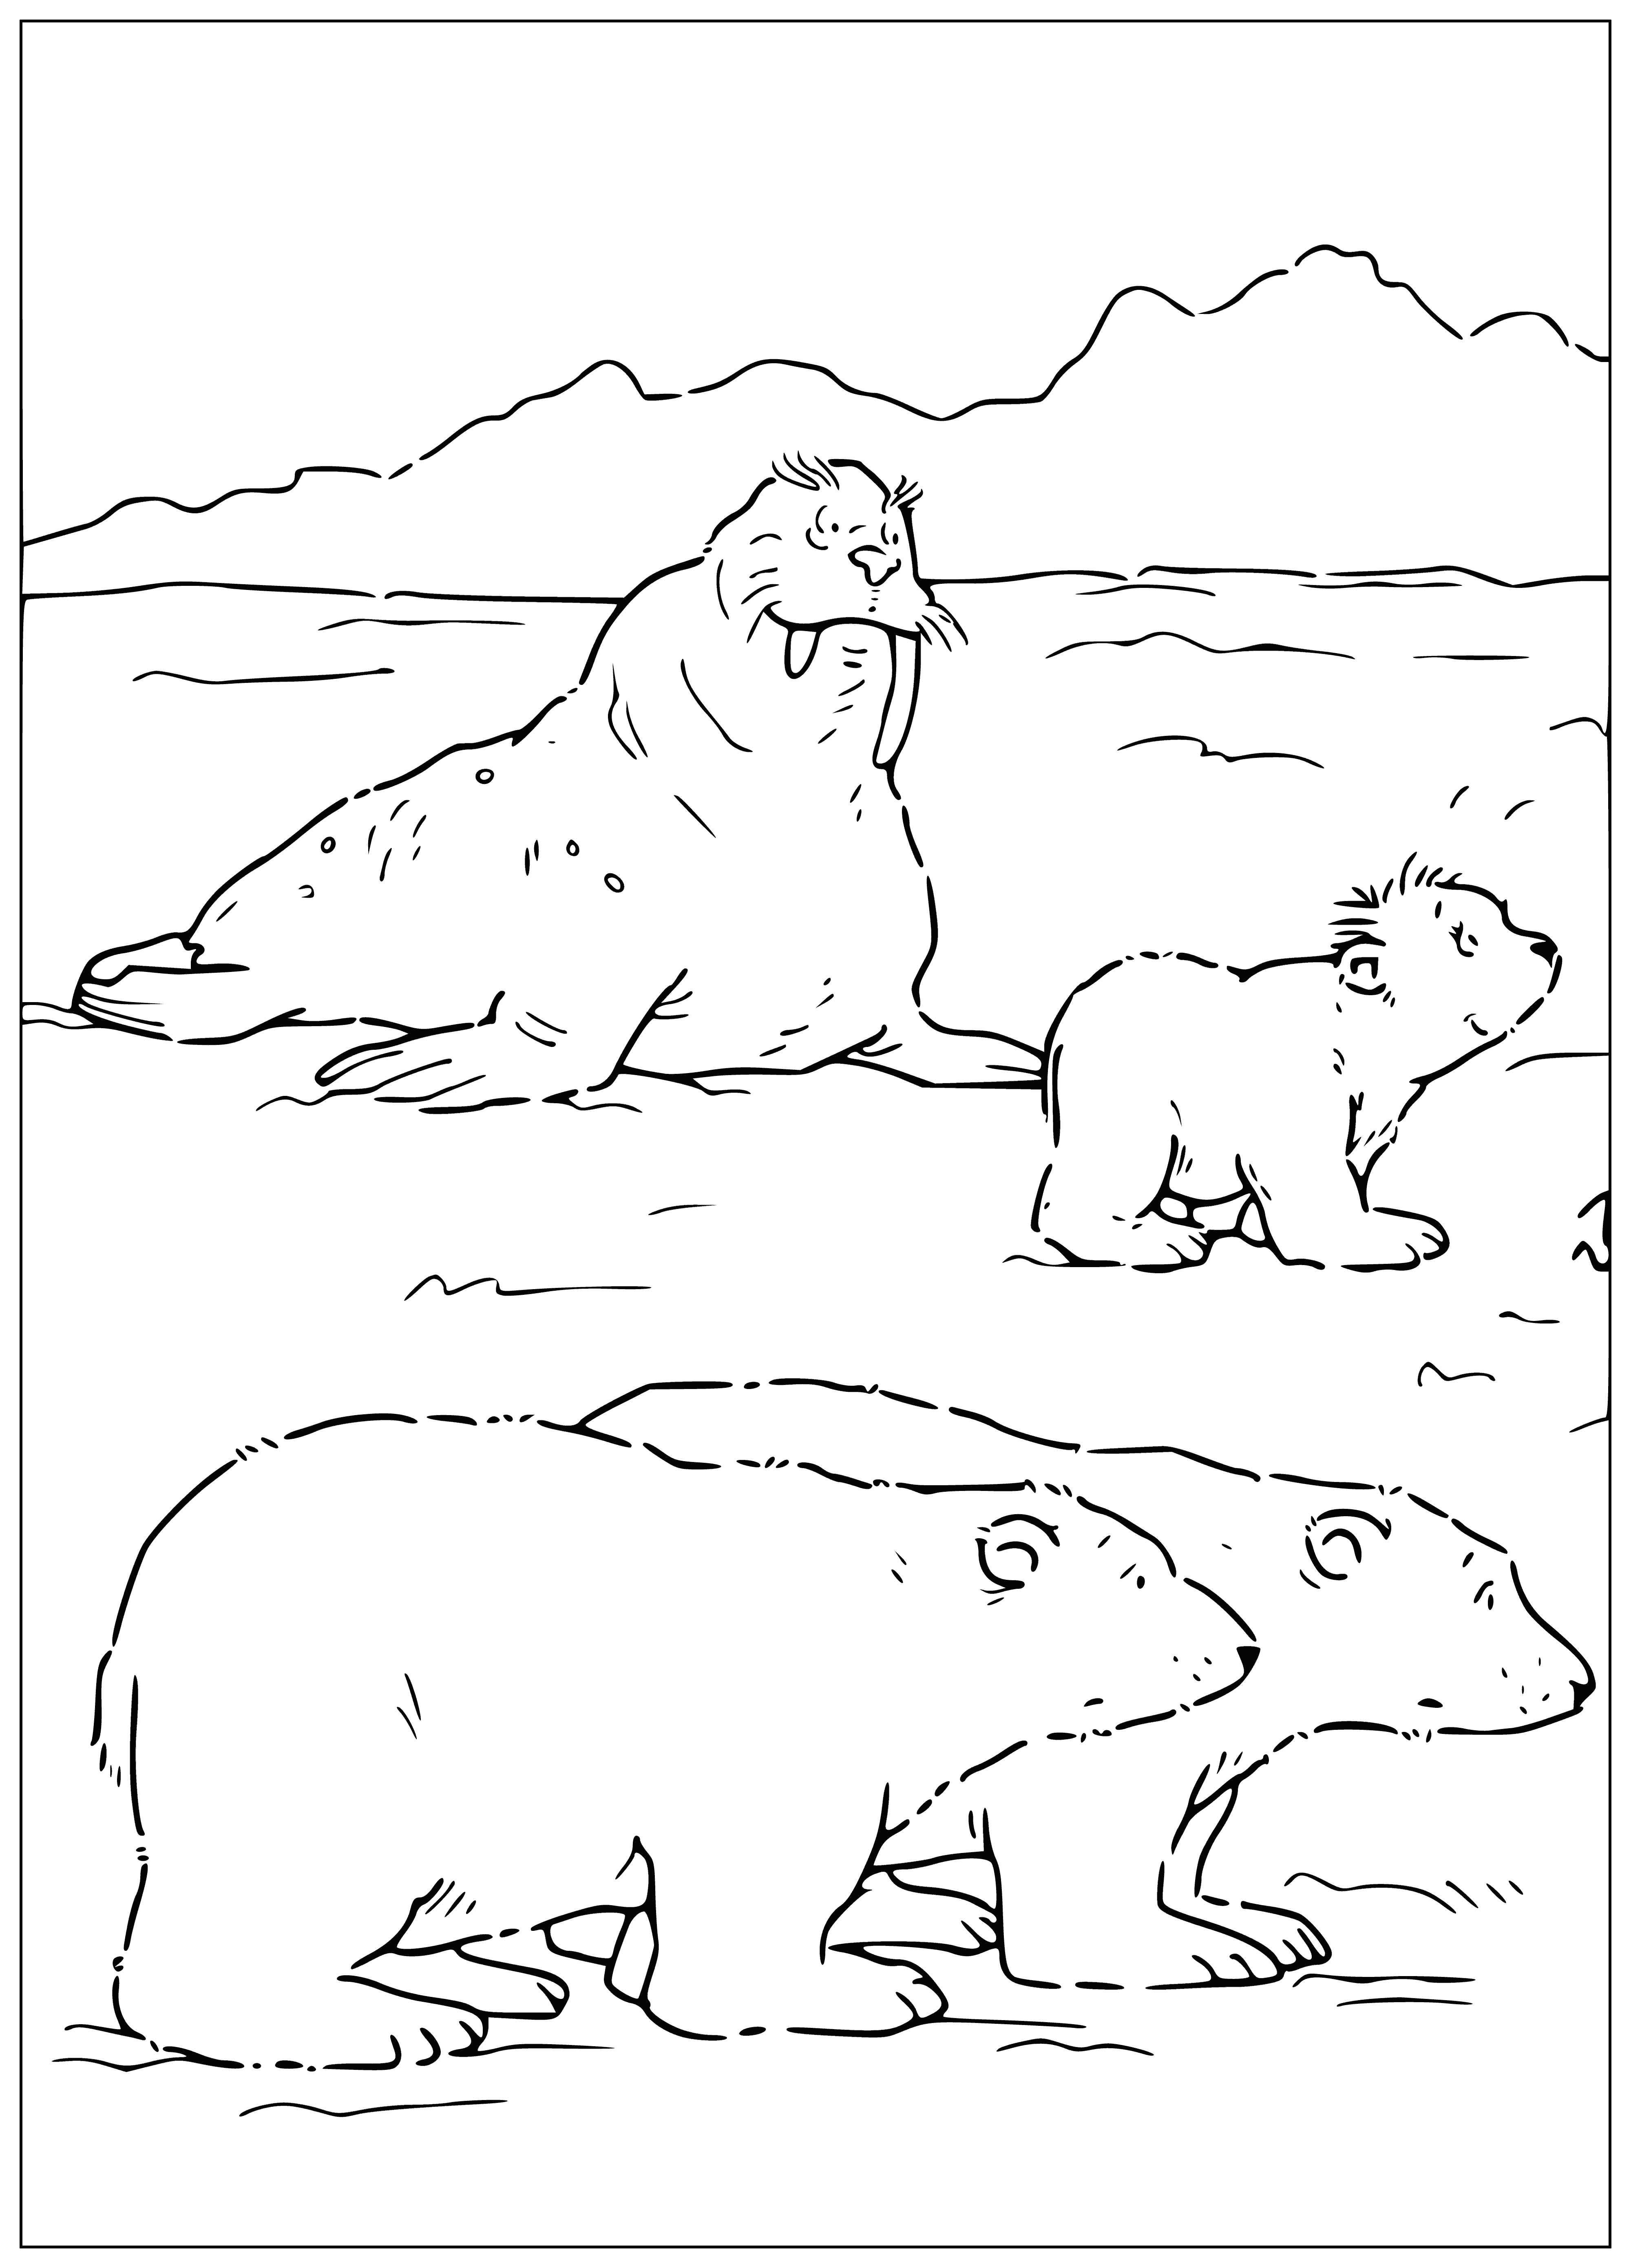 coloring page: Polar bear & walrus sit on an ice floe, one small & one large. Polar bear has white coat & black eyes; walrus has tusks & large nose. They look at each other.